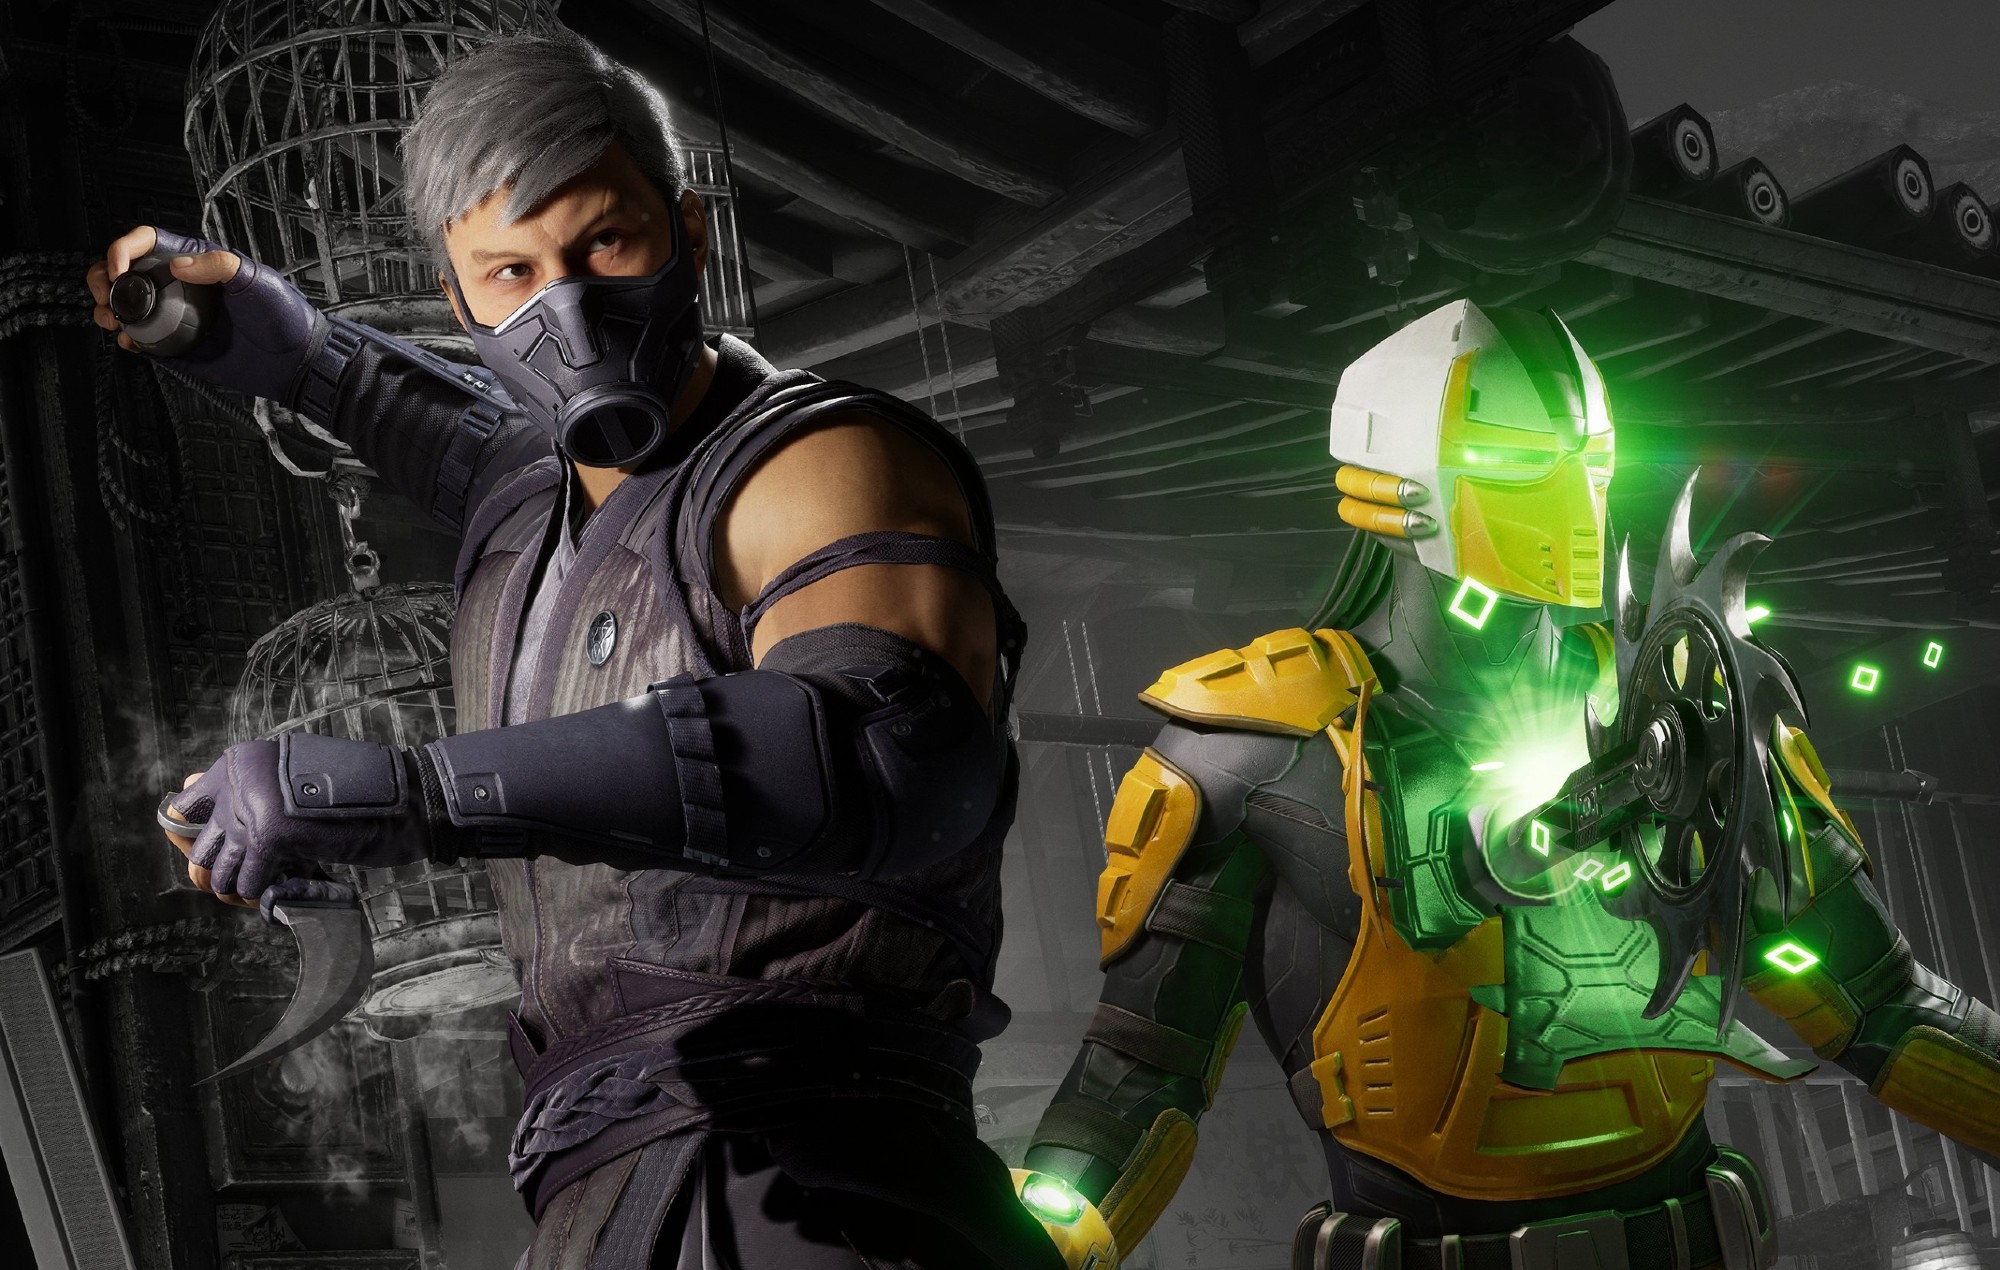 ‘Mortal Kombat 1’ Xbox Series X|S players can download the beta today